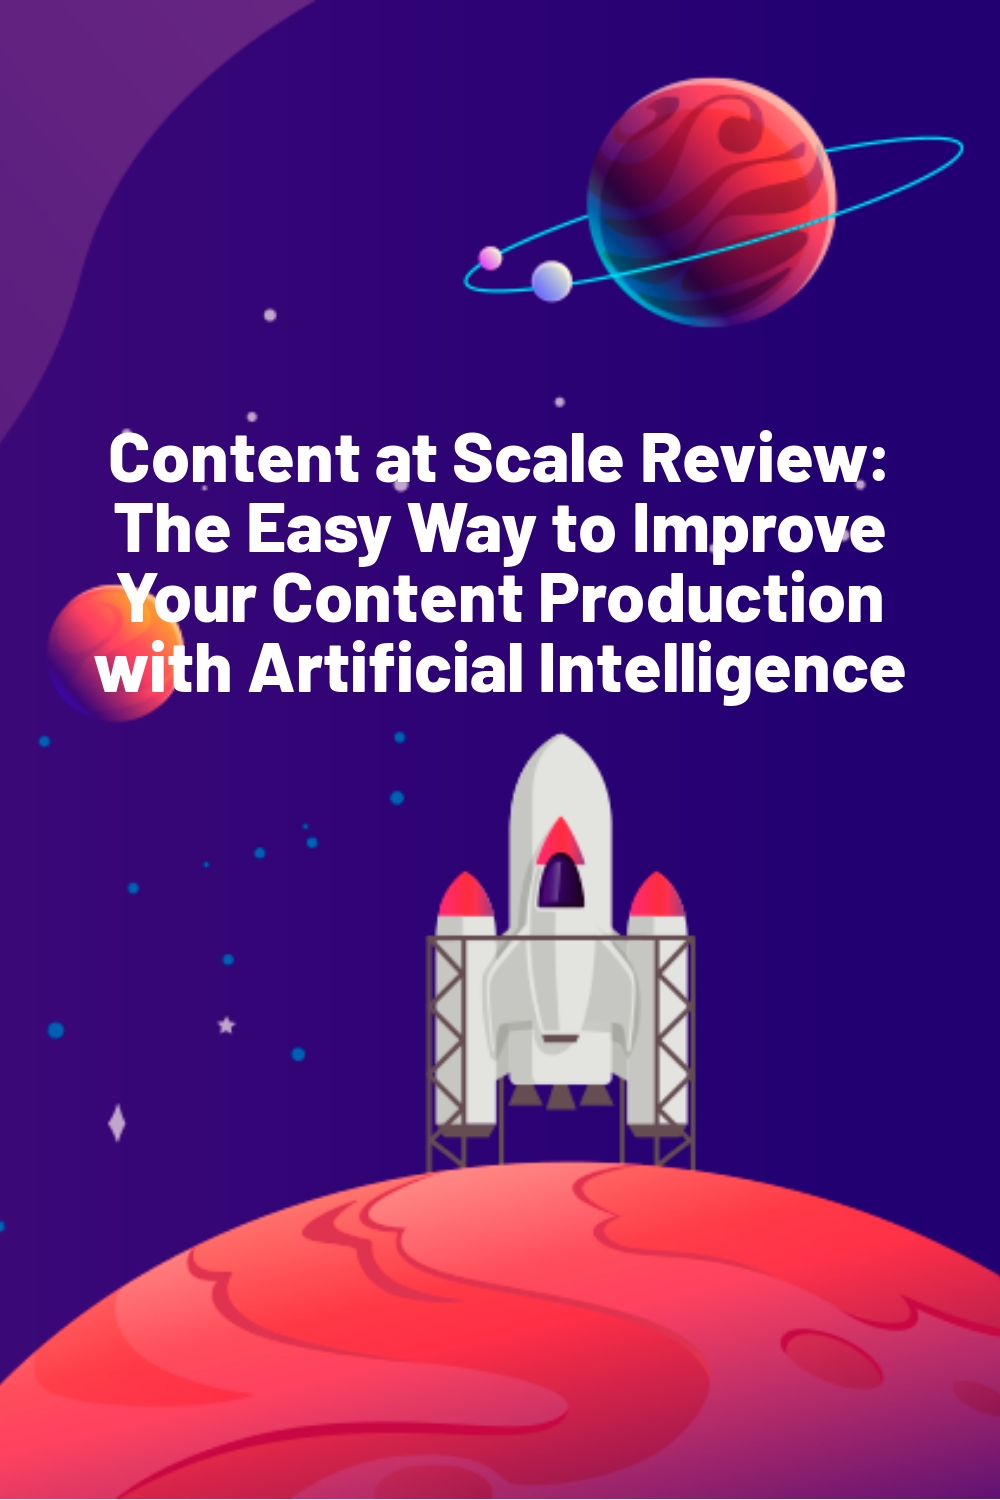 Content at Scale Review: The Easy Way to Improve Your Content Production with Artificial Intelligence